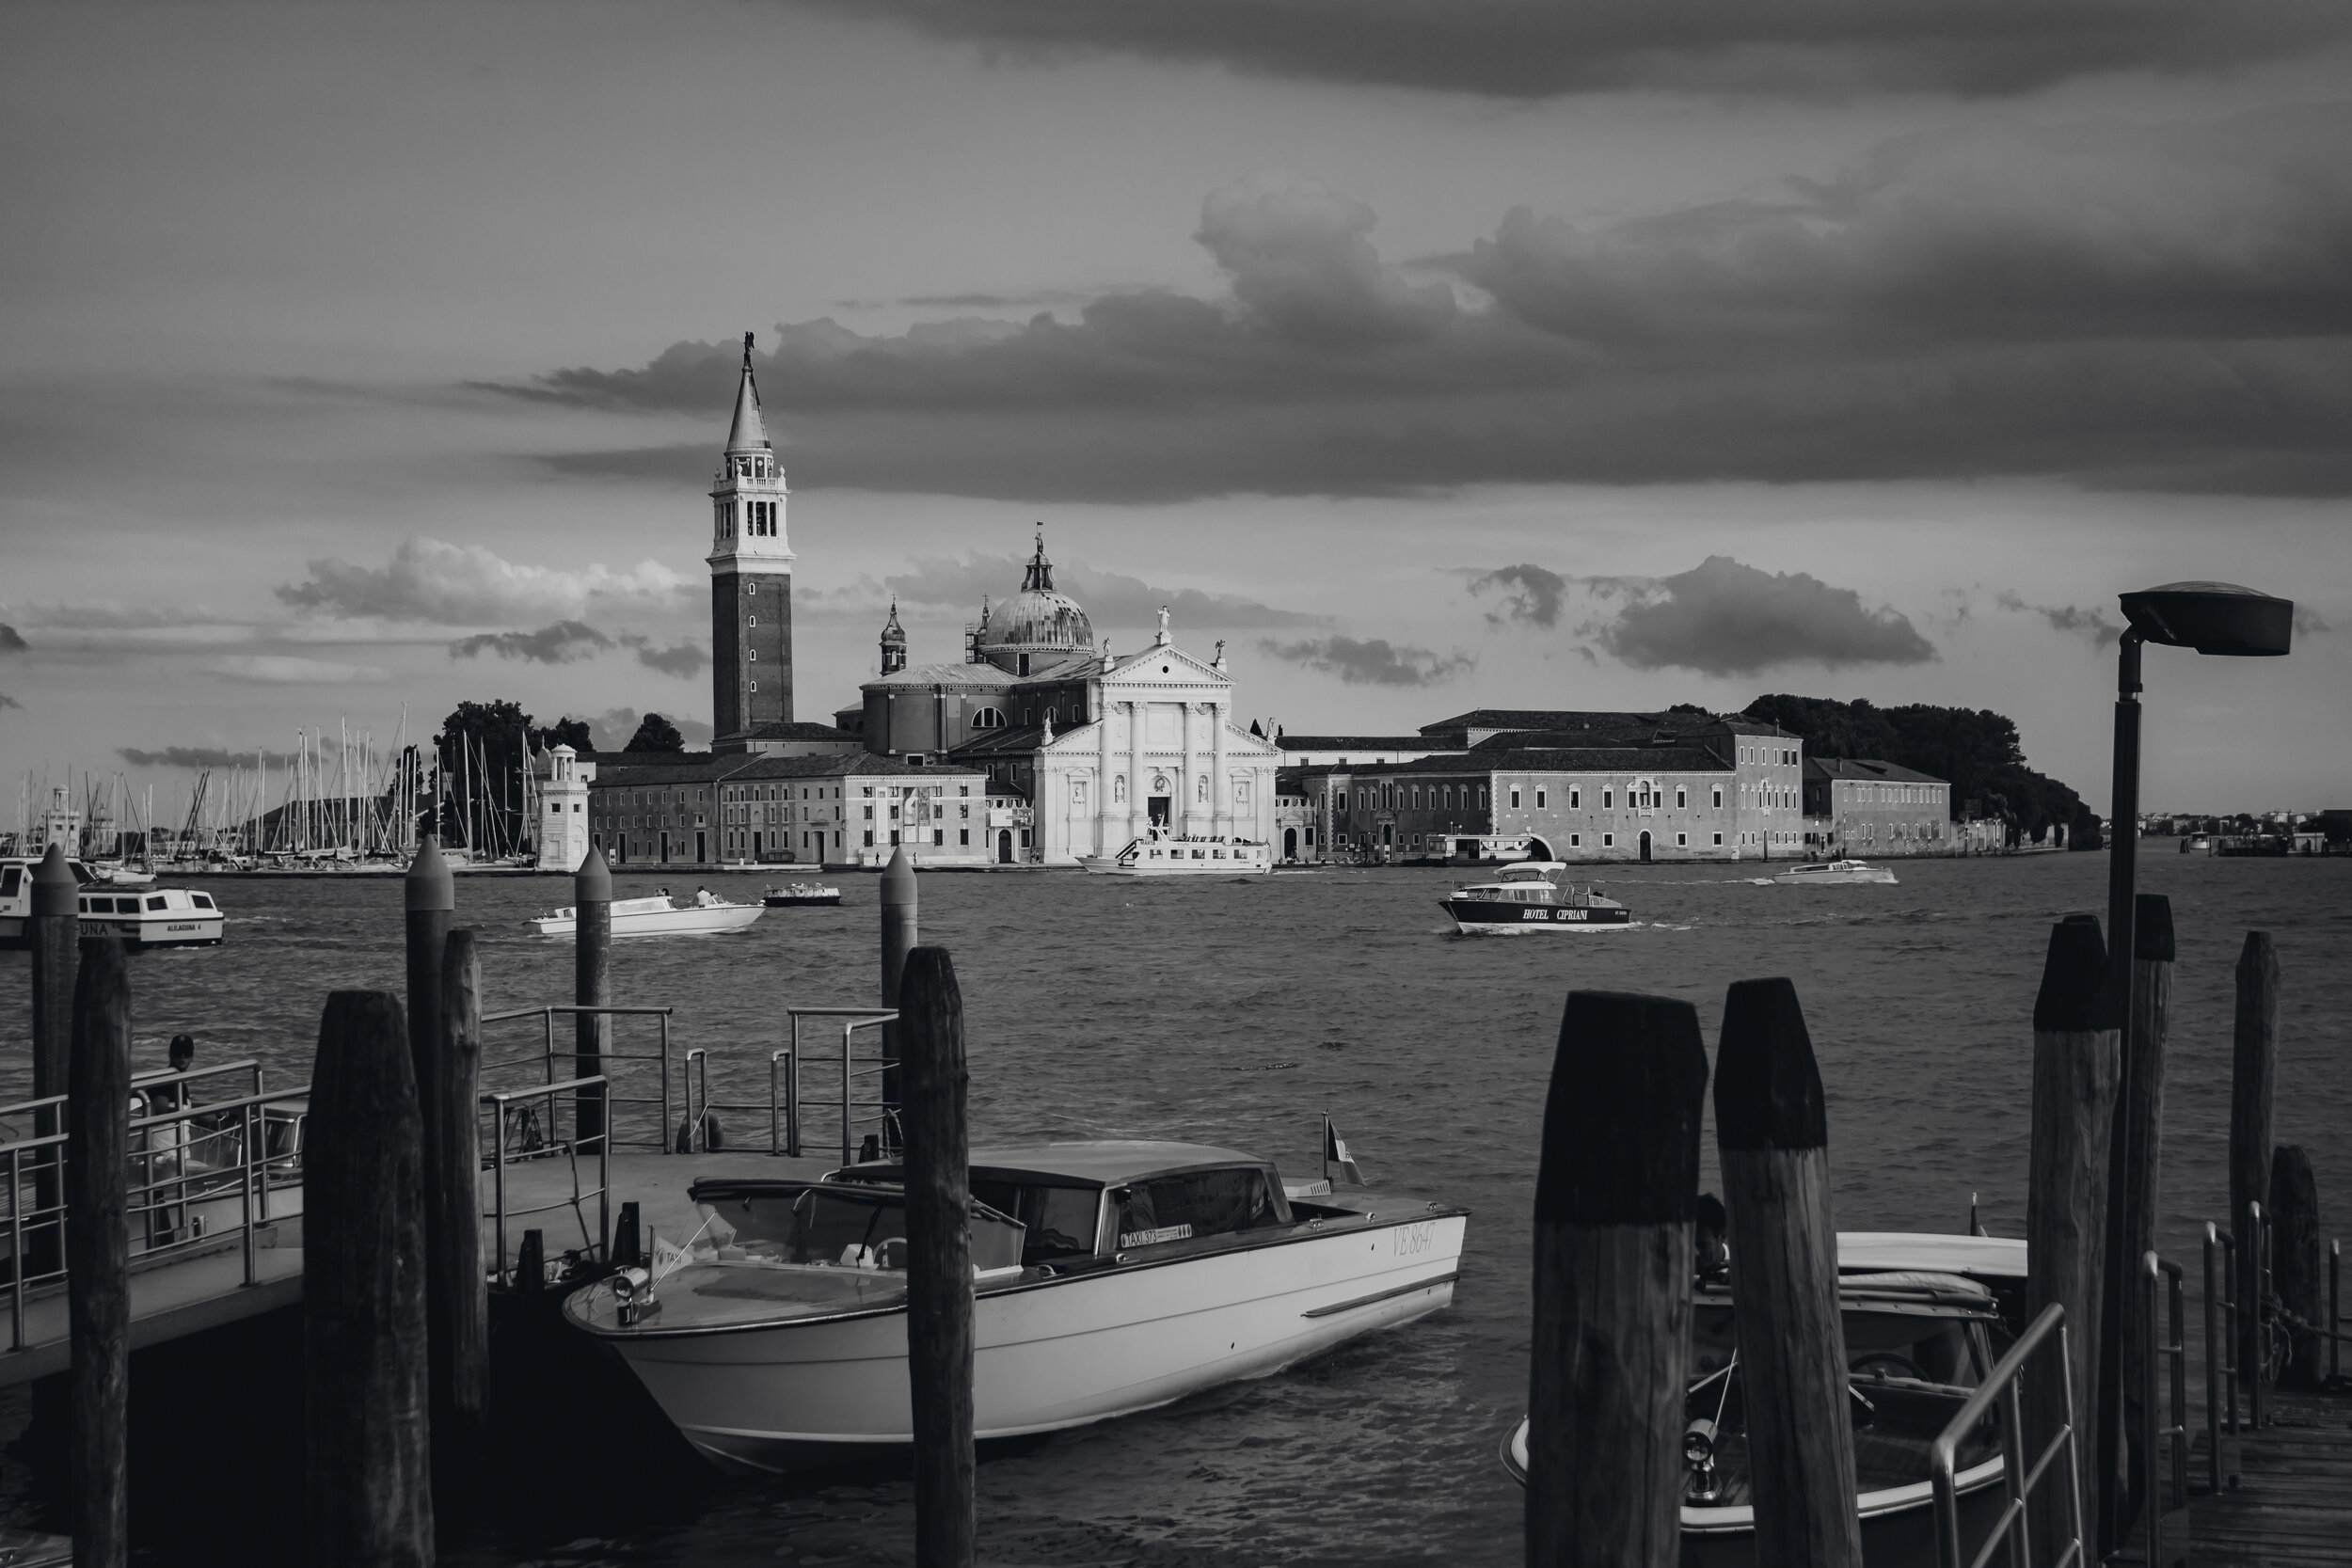 Bacino San Marco From St Mark's Square Black and White